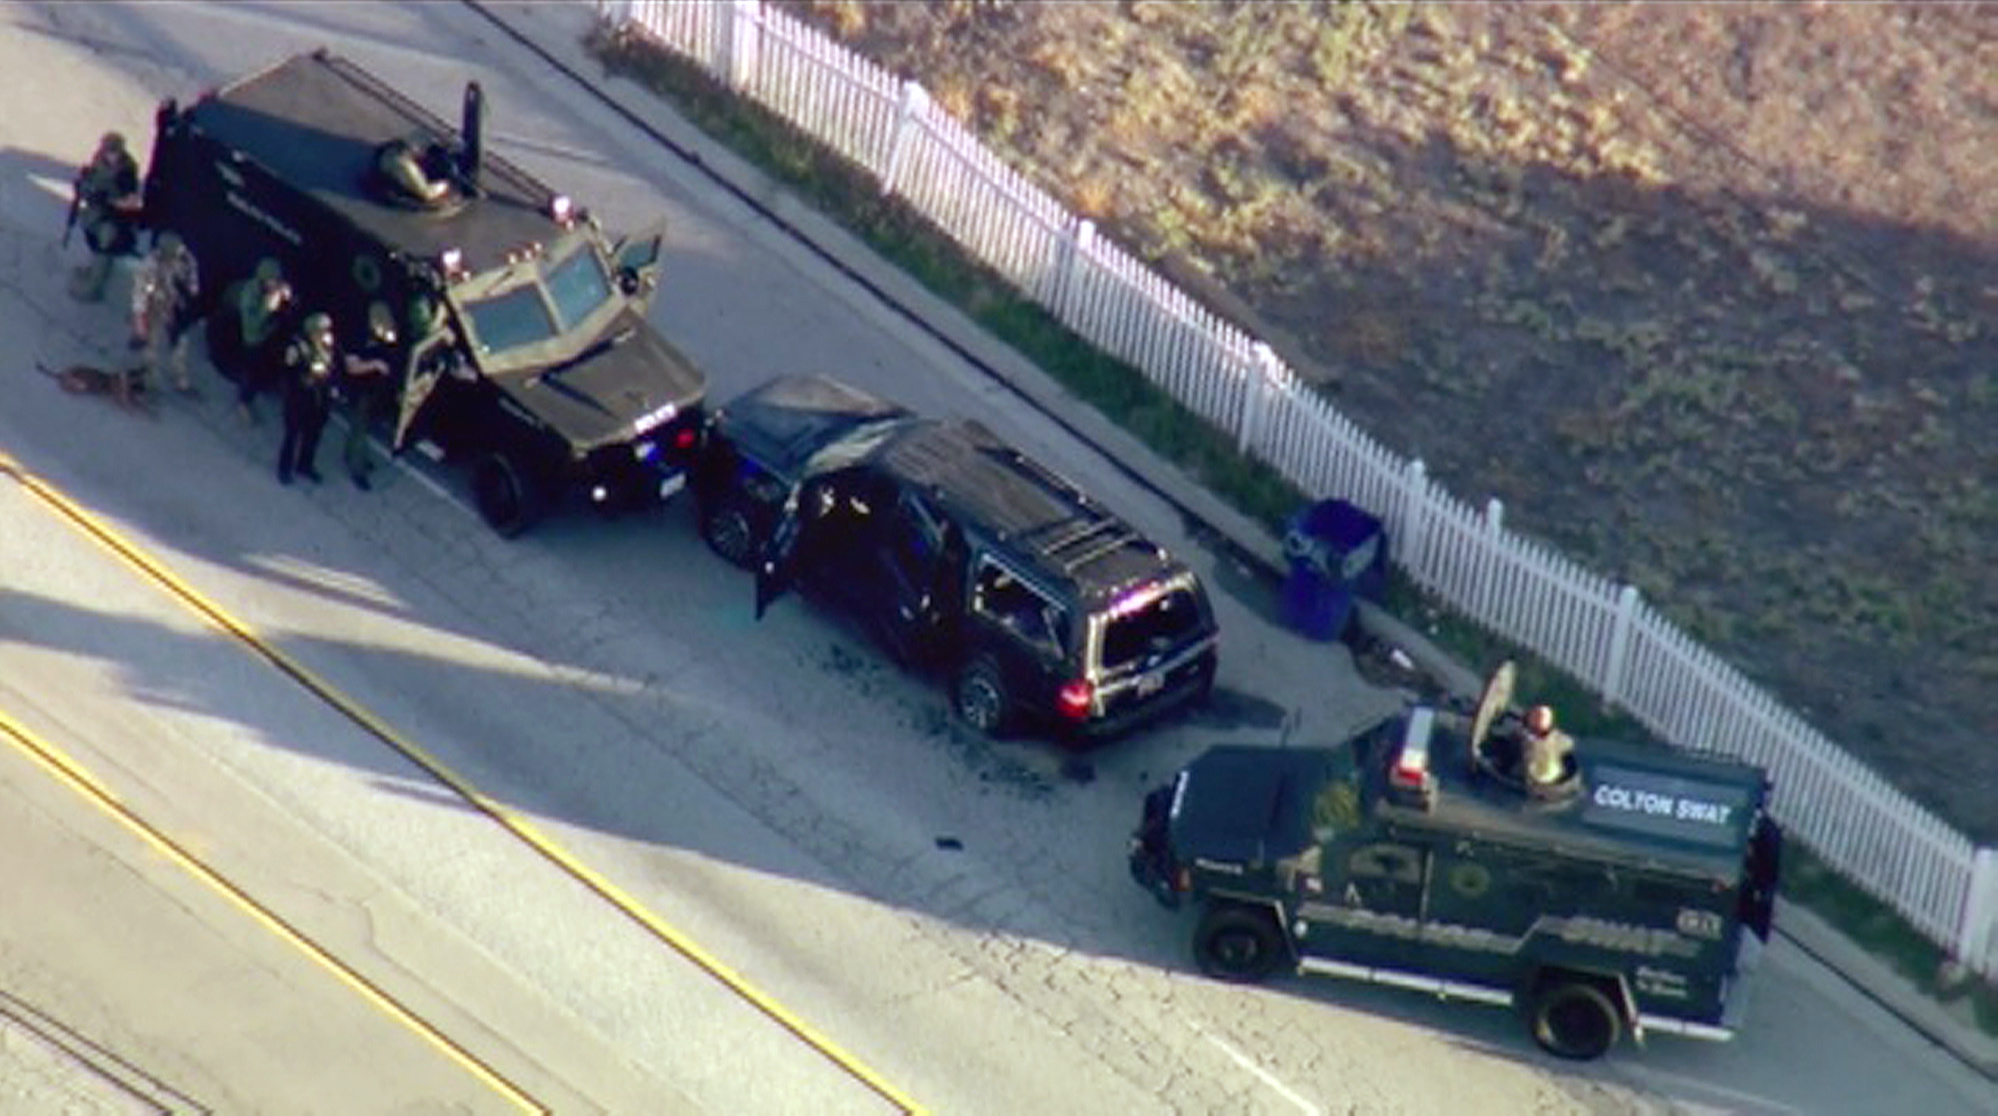 Armored vehicles surround an SUV following a shootout Wednesday in San Bernardino, Calif. The scene followed a military-style attack that killed 14 people and wounded more than a dozen others at a California center that serves people with developmental disabilities, authorities said.